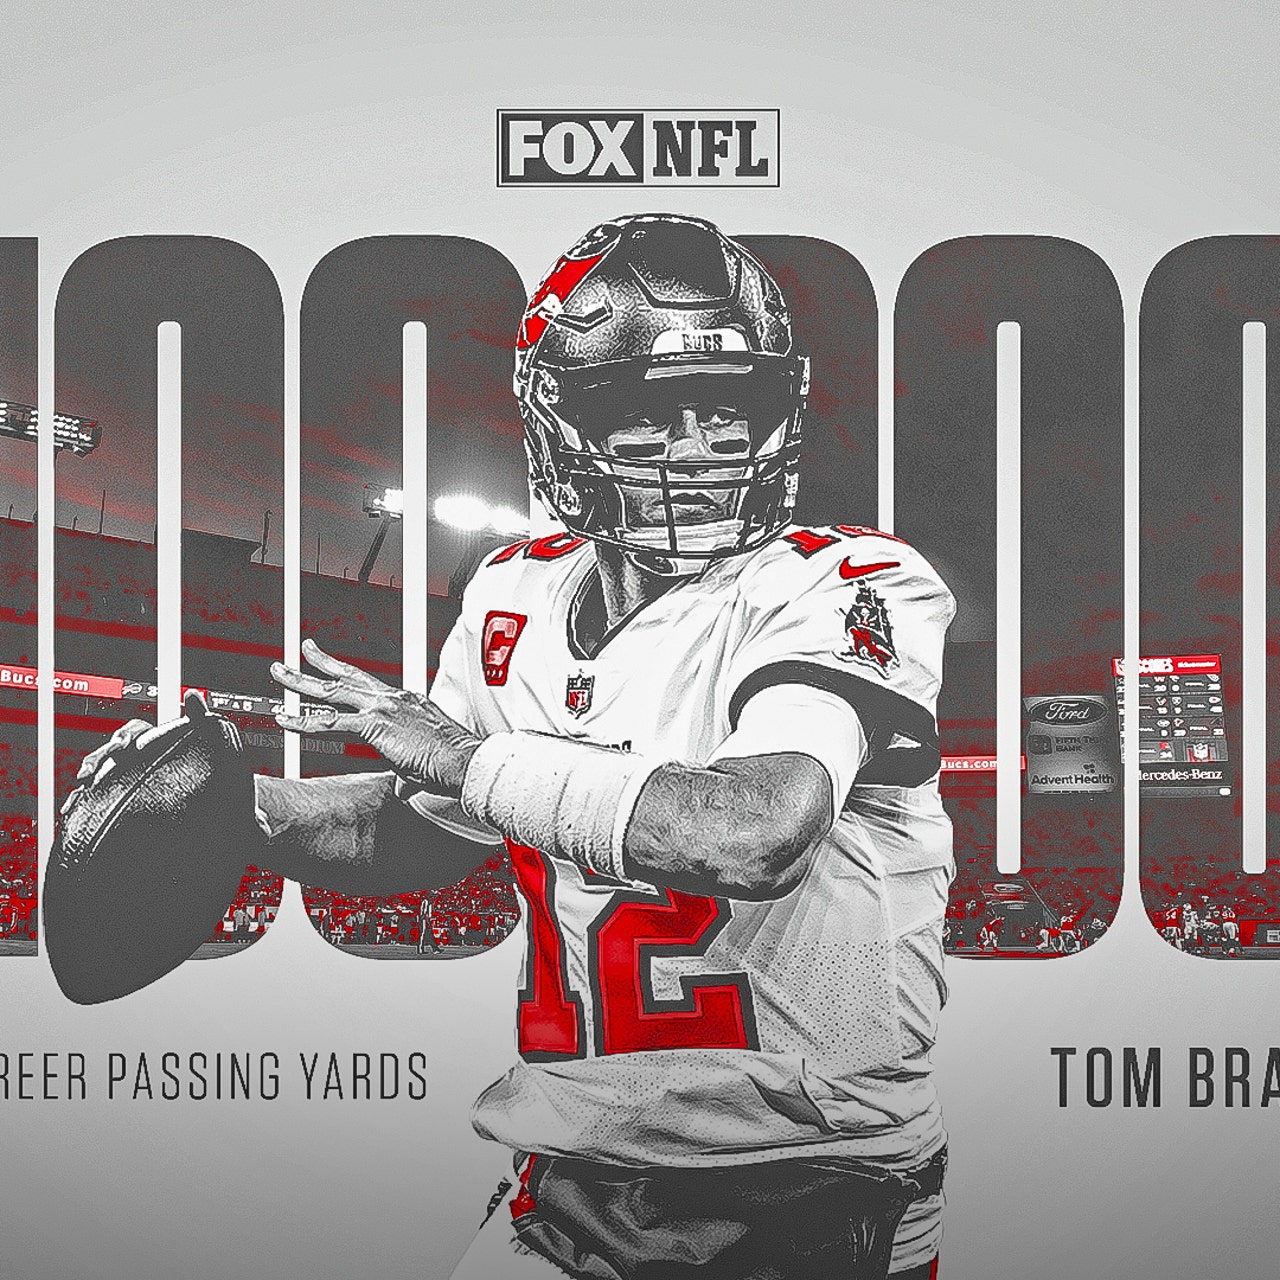 Tom Brady reaches 100,000 combined NFL passing yards